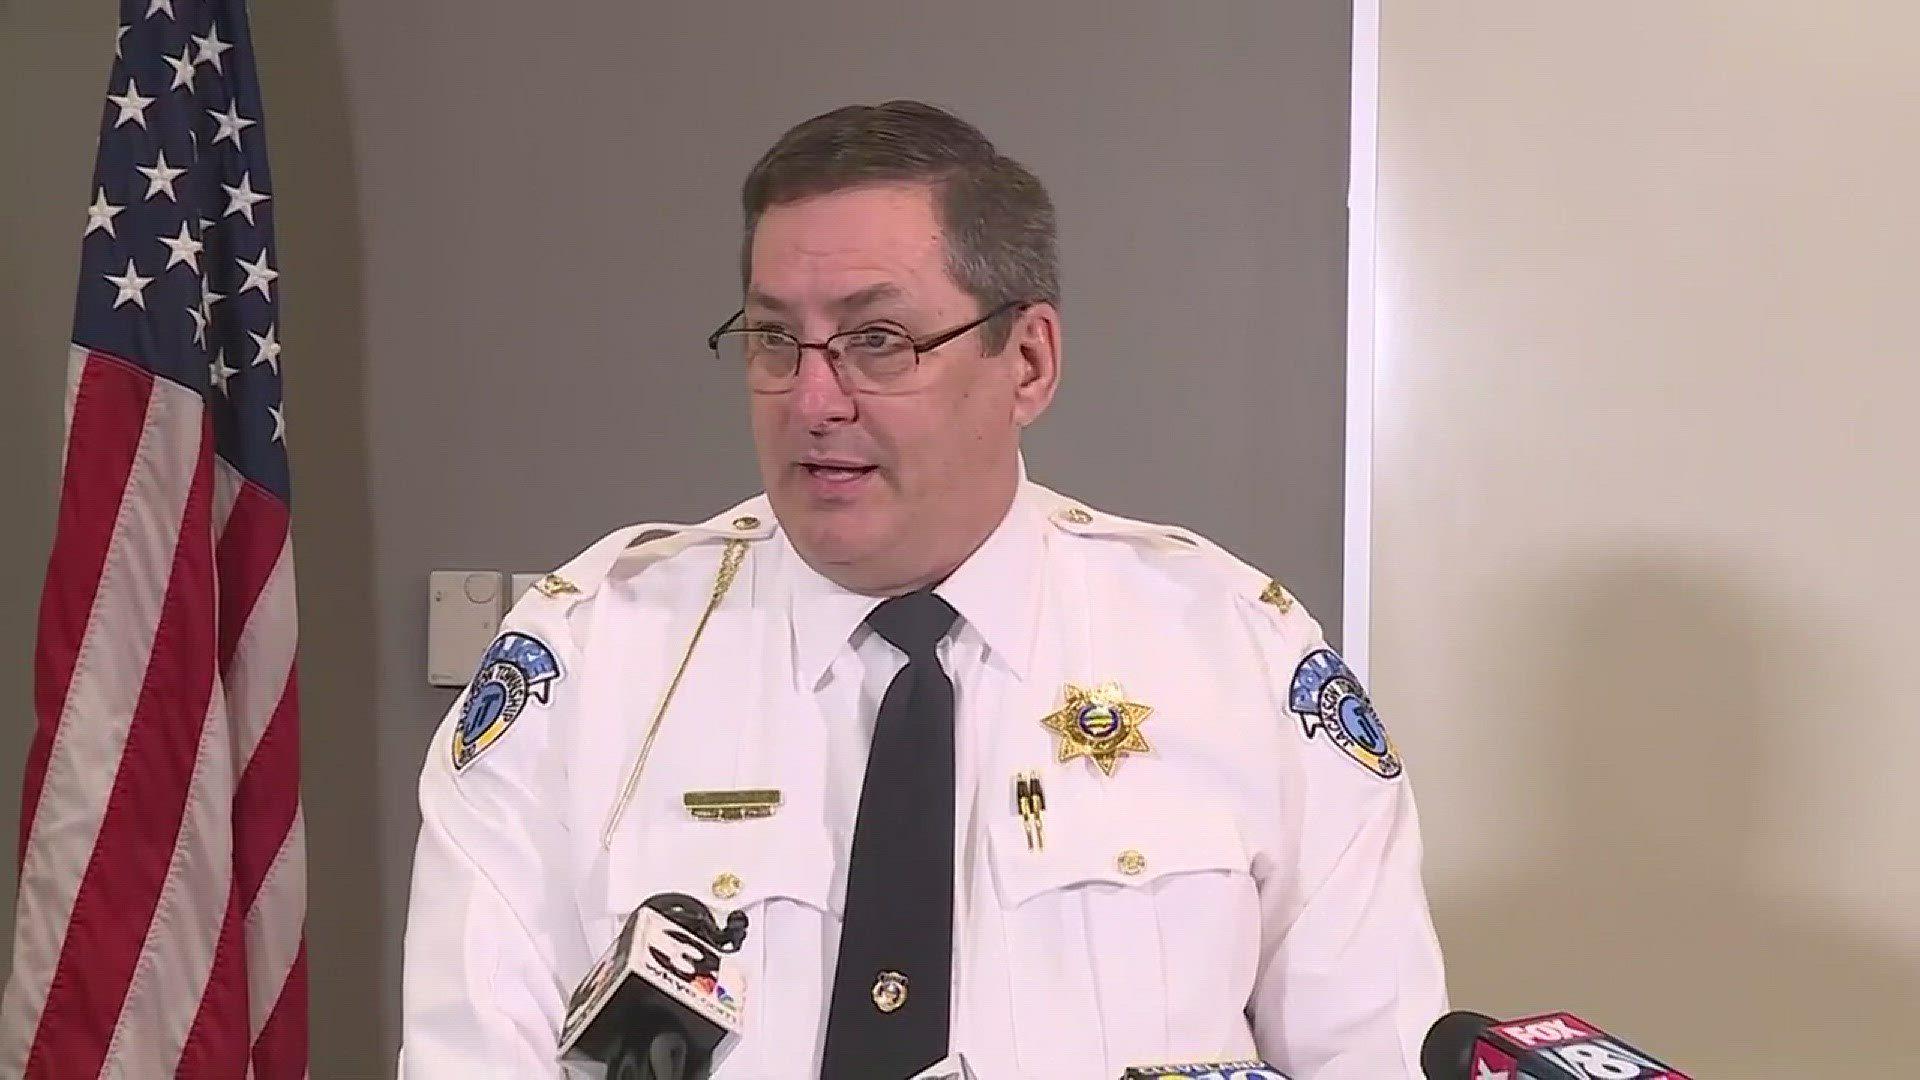 Jackson Township Police hold press conference after student fatally shot self